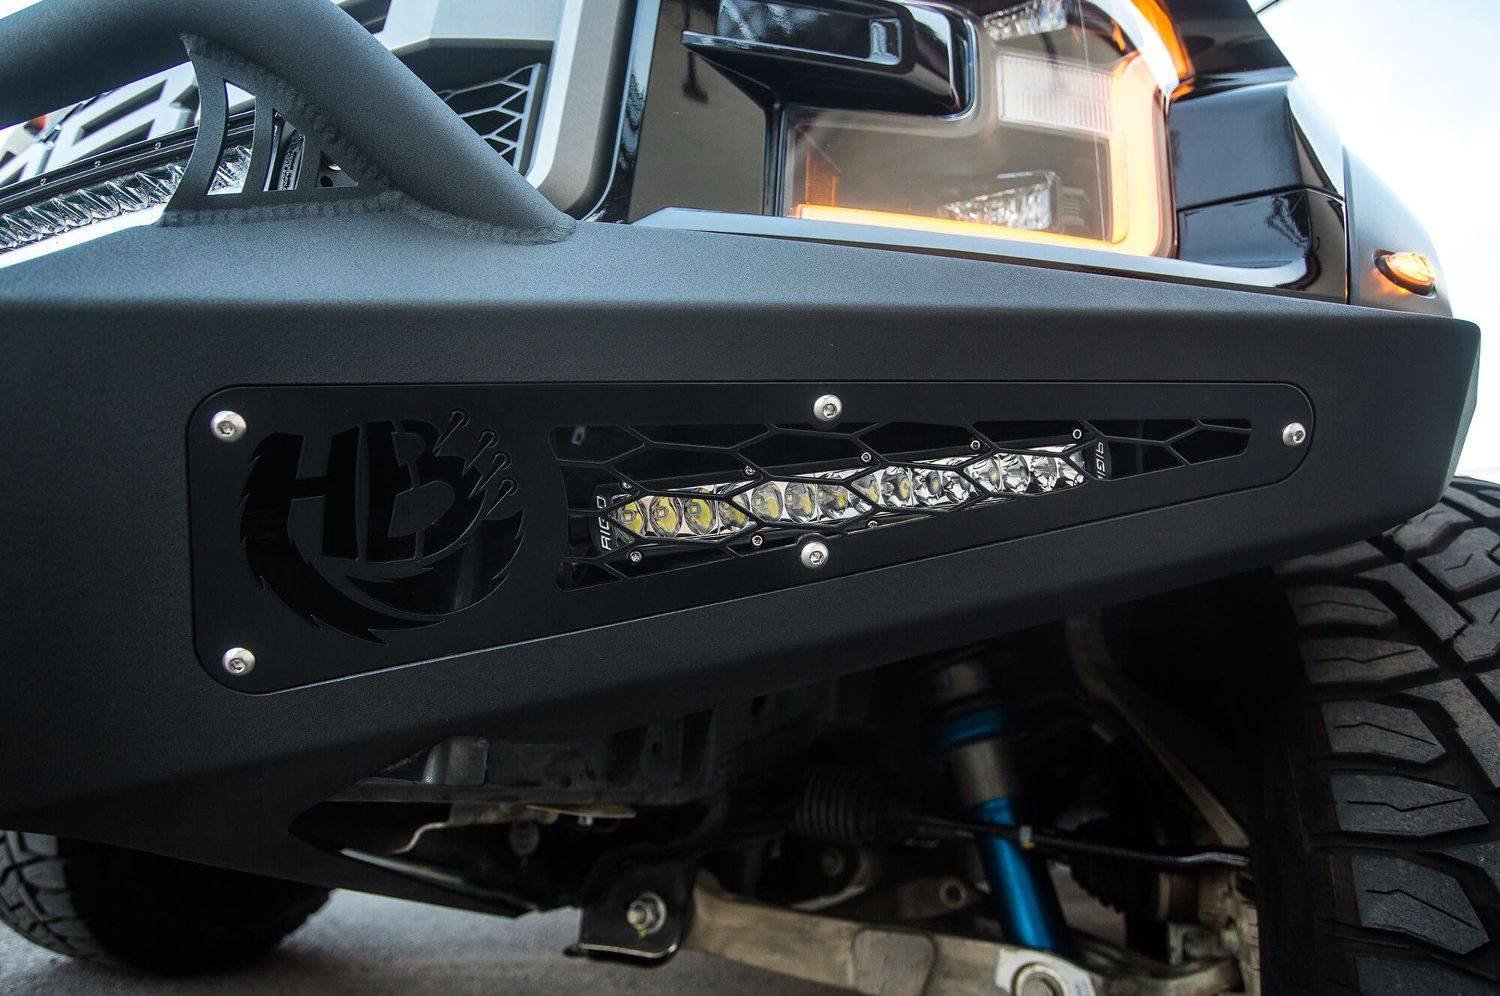 ADD F117382860103 Ford F150 Raptor 2017 Honeybadger Front Bumper With Winch and LED Lights Mount Hammer Black - BumperOnly